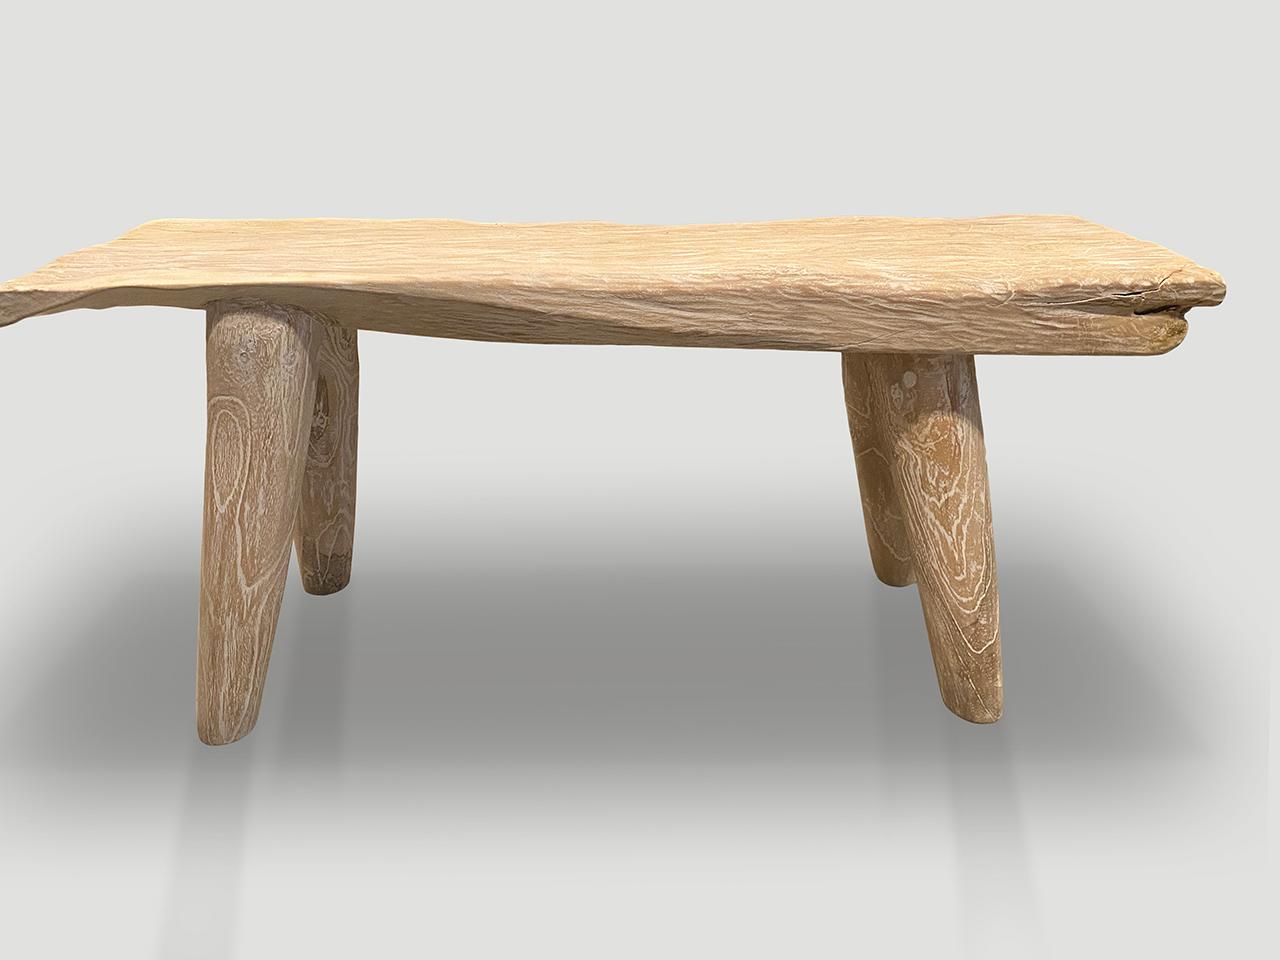 Single slab live edge bleached teak bench. We added a light white wash ceruse revealing the beautiful wood grain and cone style legs. Organic is the new modern.

The St. Barts Collection features an exciting new line of organic white wash, bleached